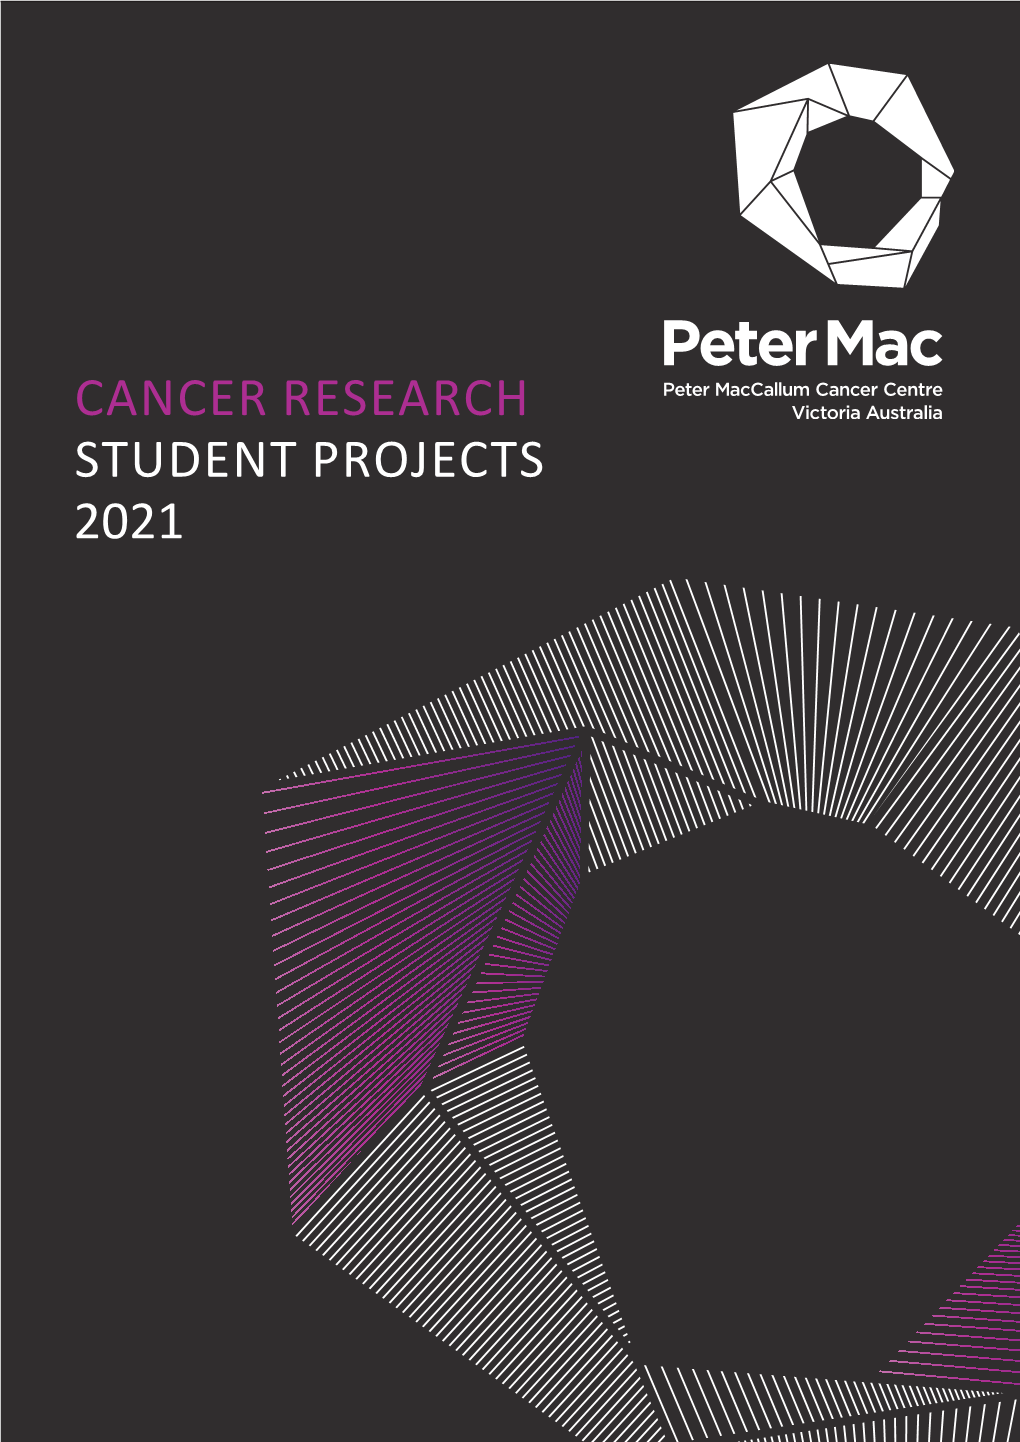 Cancer Research Student Projects 2021